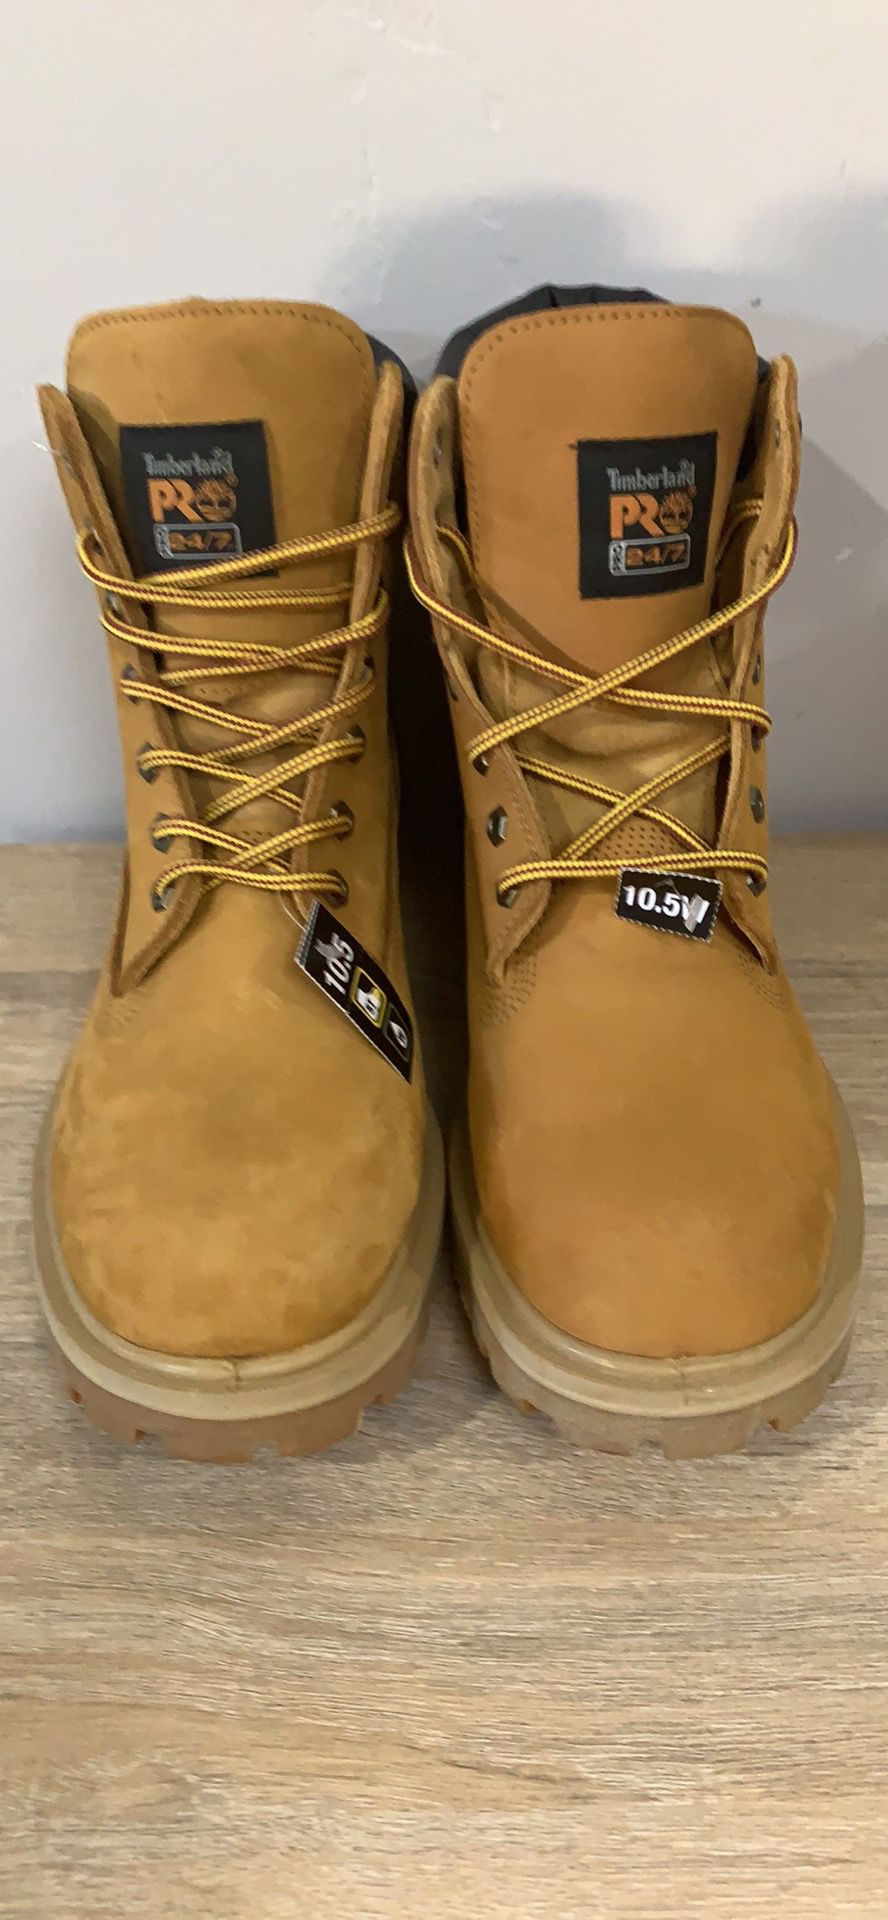 Timberland steel toe work boots size 10.5/M